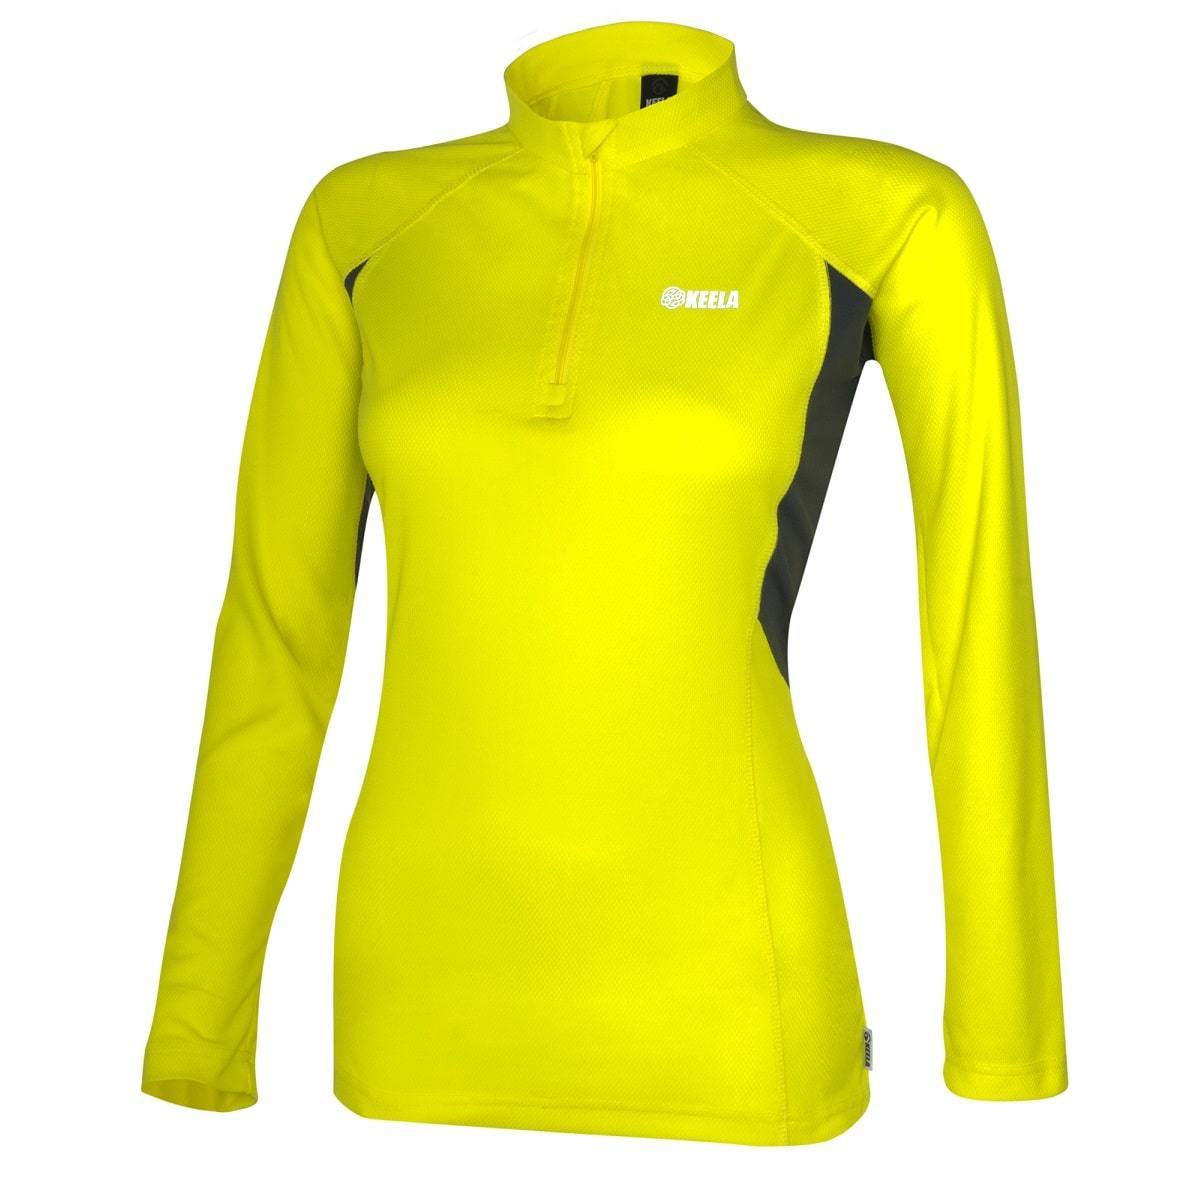 Keela, Keela Ladies' ADS Adv L/S Top, Base Layers,Wylies Outdoor World,